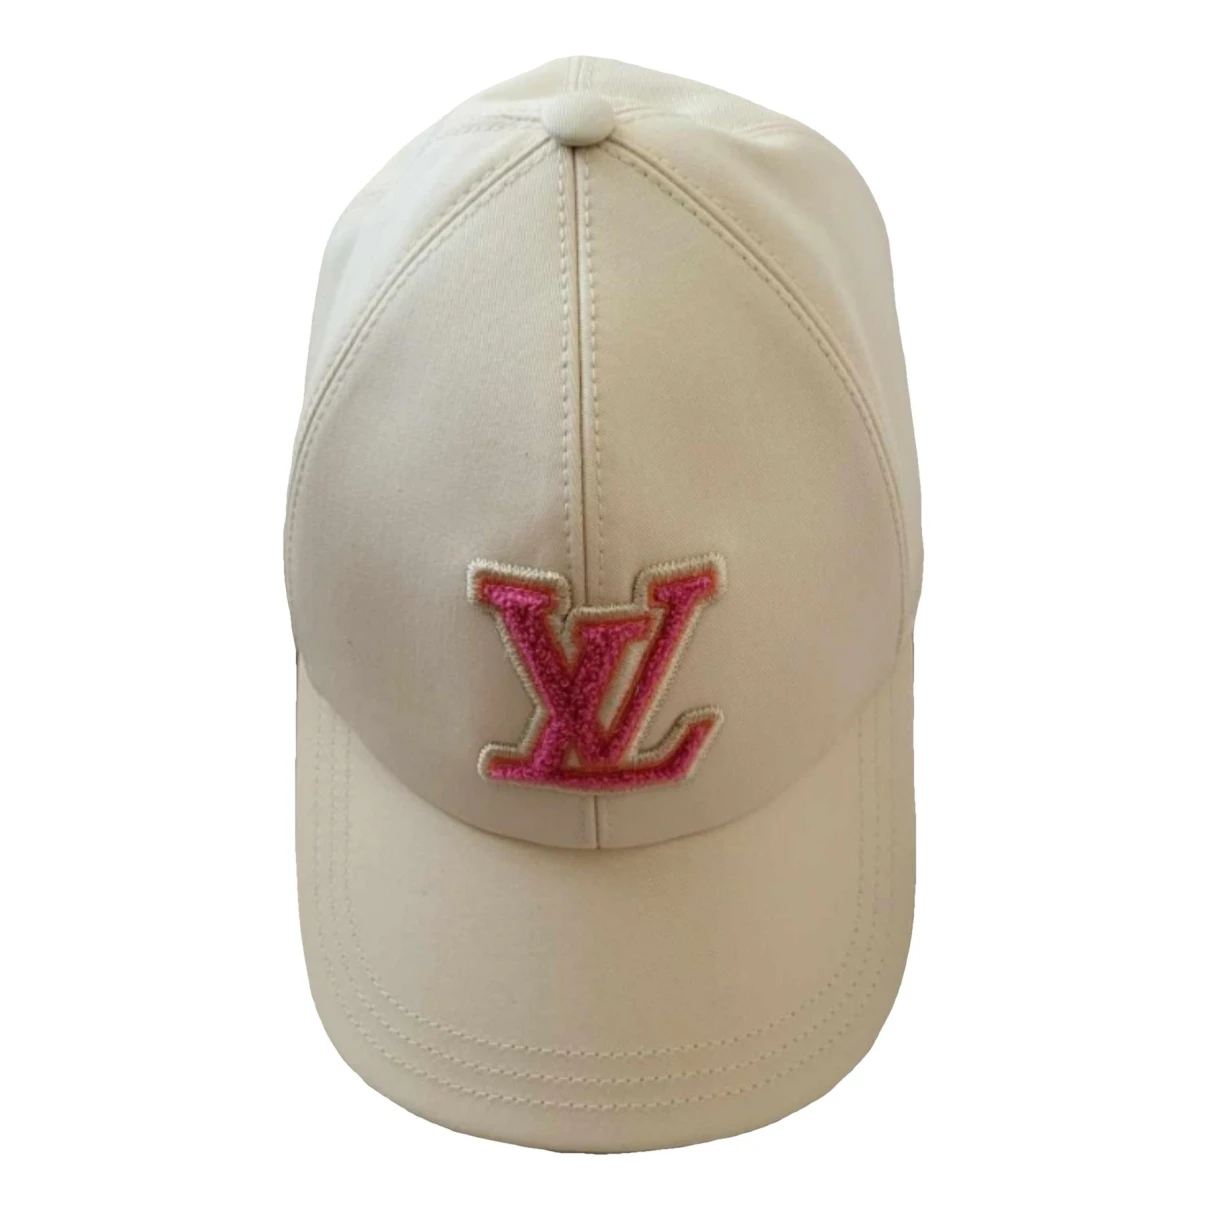 accessories Louis Vuitton hats for Female Cotton M International. Used condition